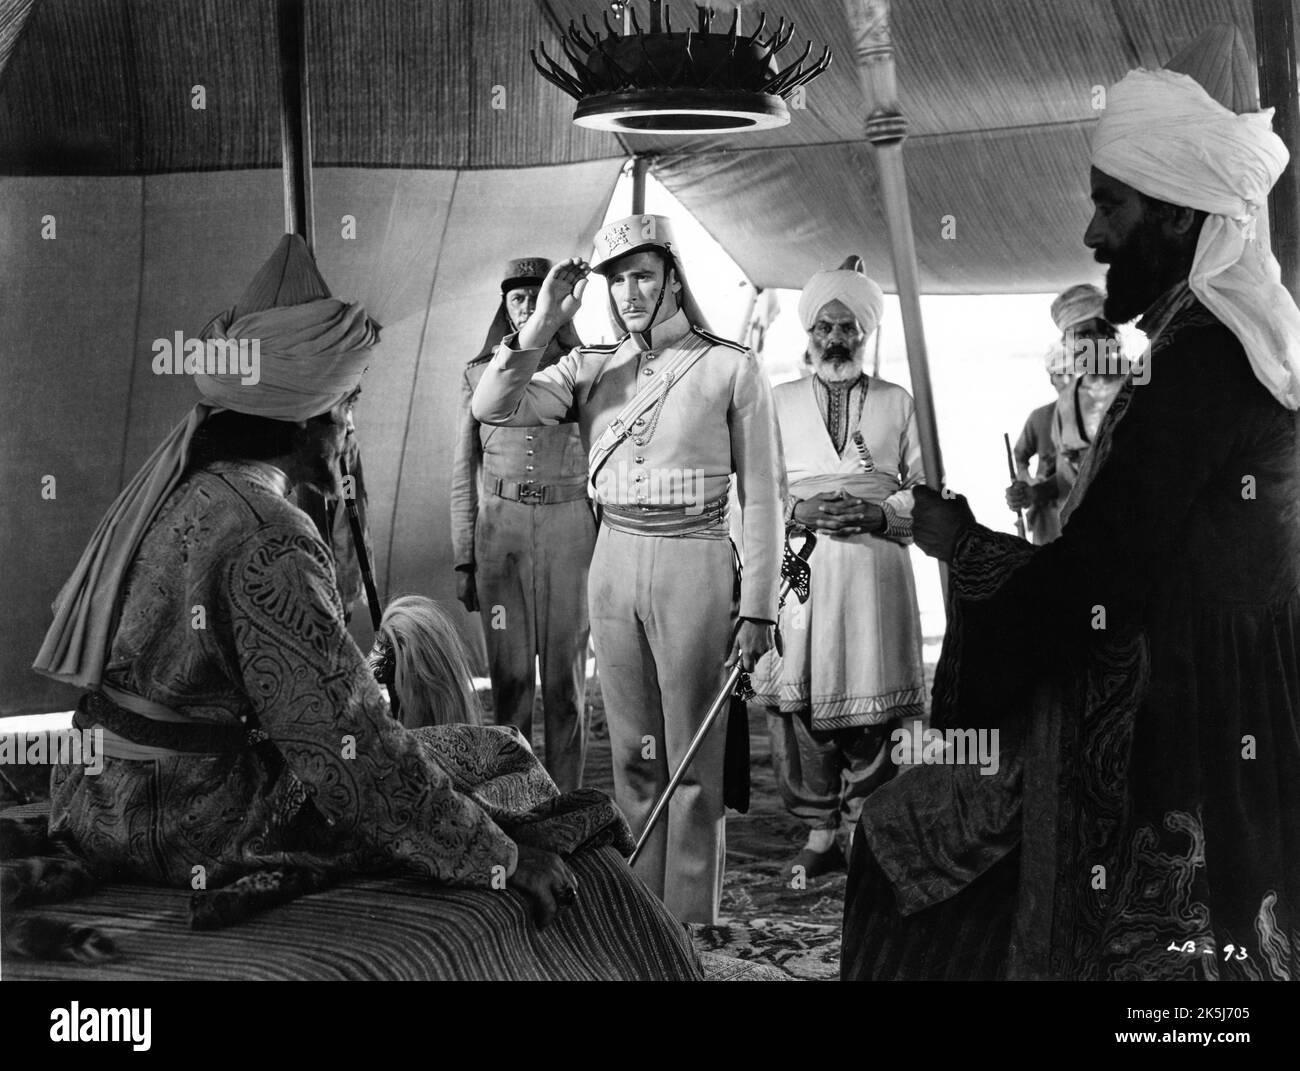 C. HENRY GORDON as Surat Khan and ERROL FLYNN as Major Geoffrey Vickers in THE CHARGE OF THE LIGHT BRIGADE 1936 director MICHAEL CURTIZ poem Alfred Lord Tennyson music Max Steiner Warner Bros. Stock Photo